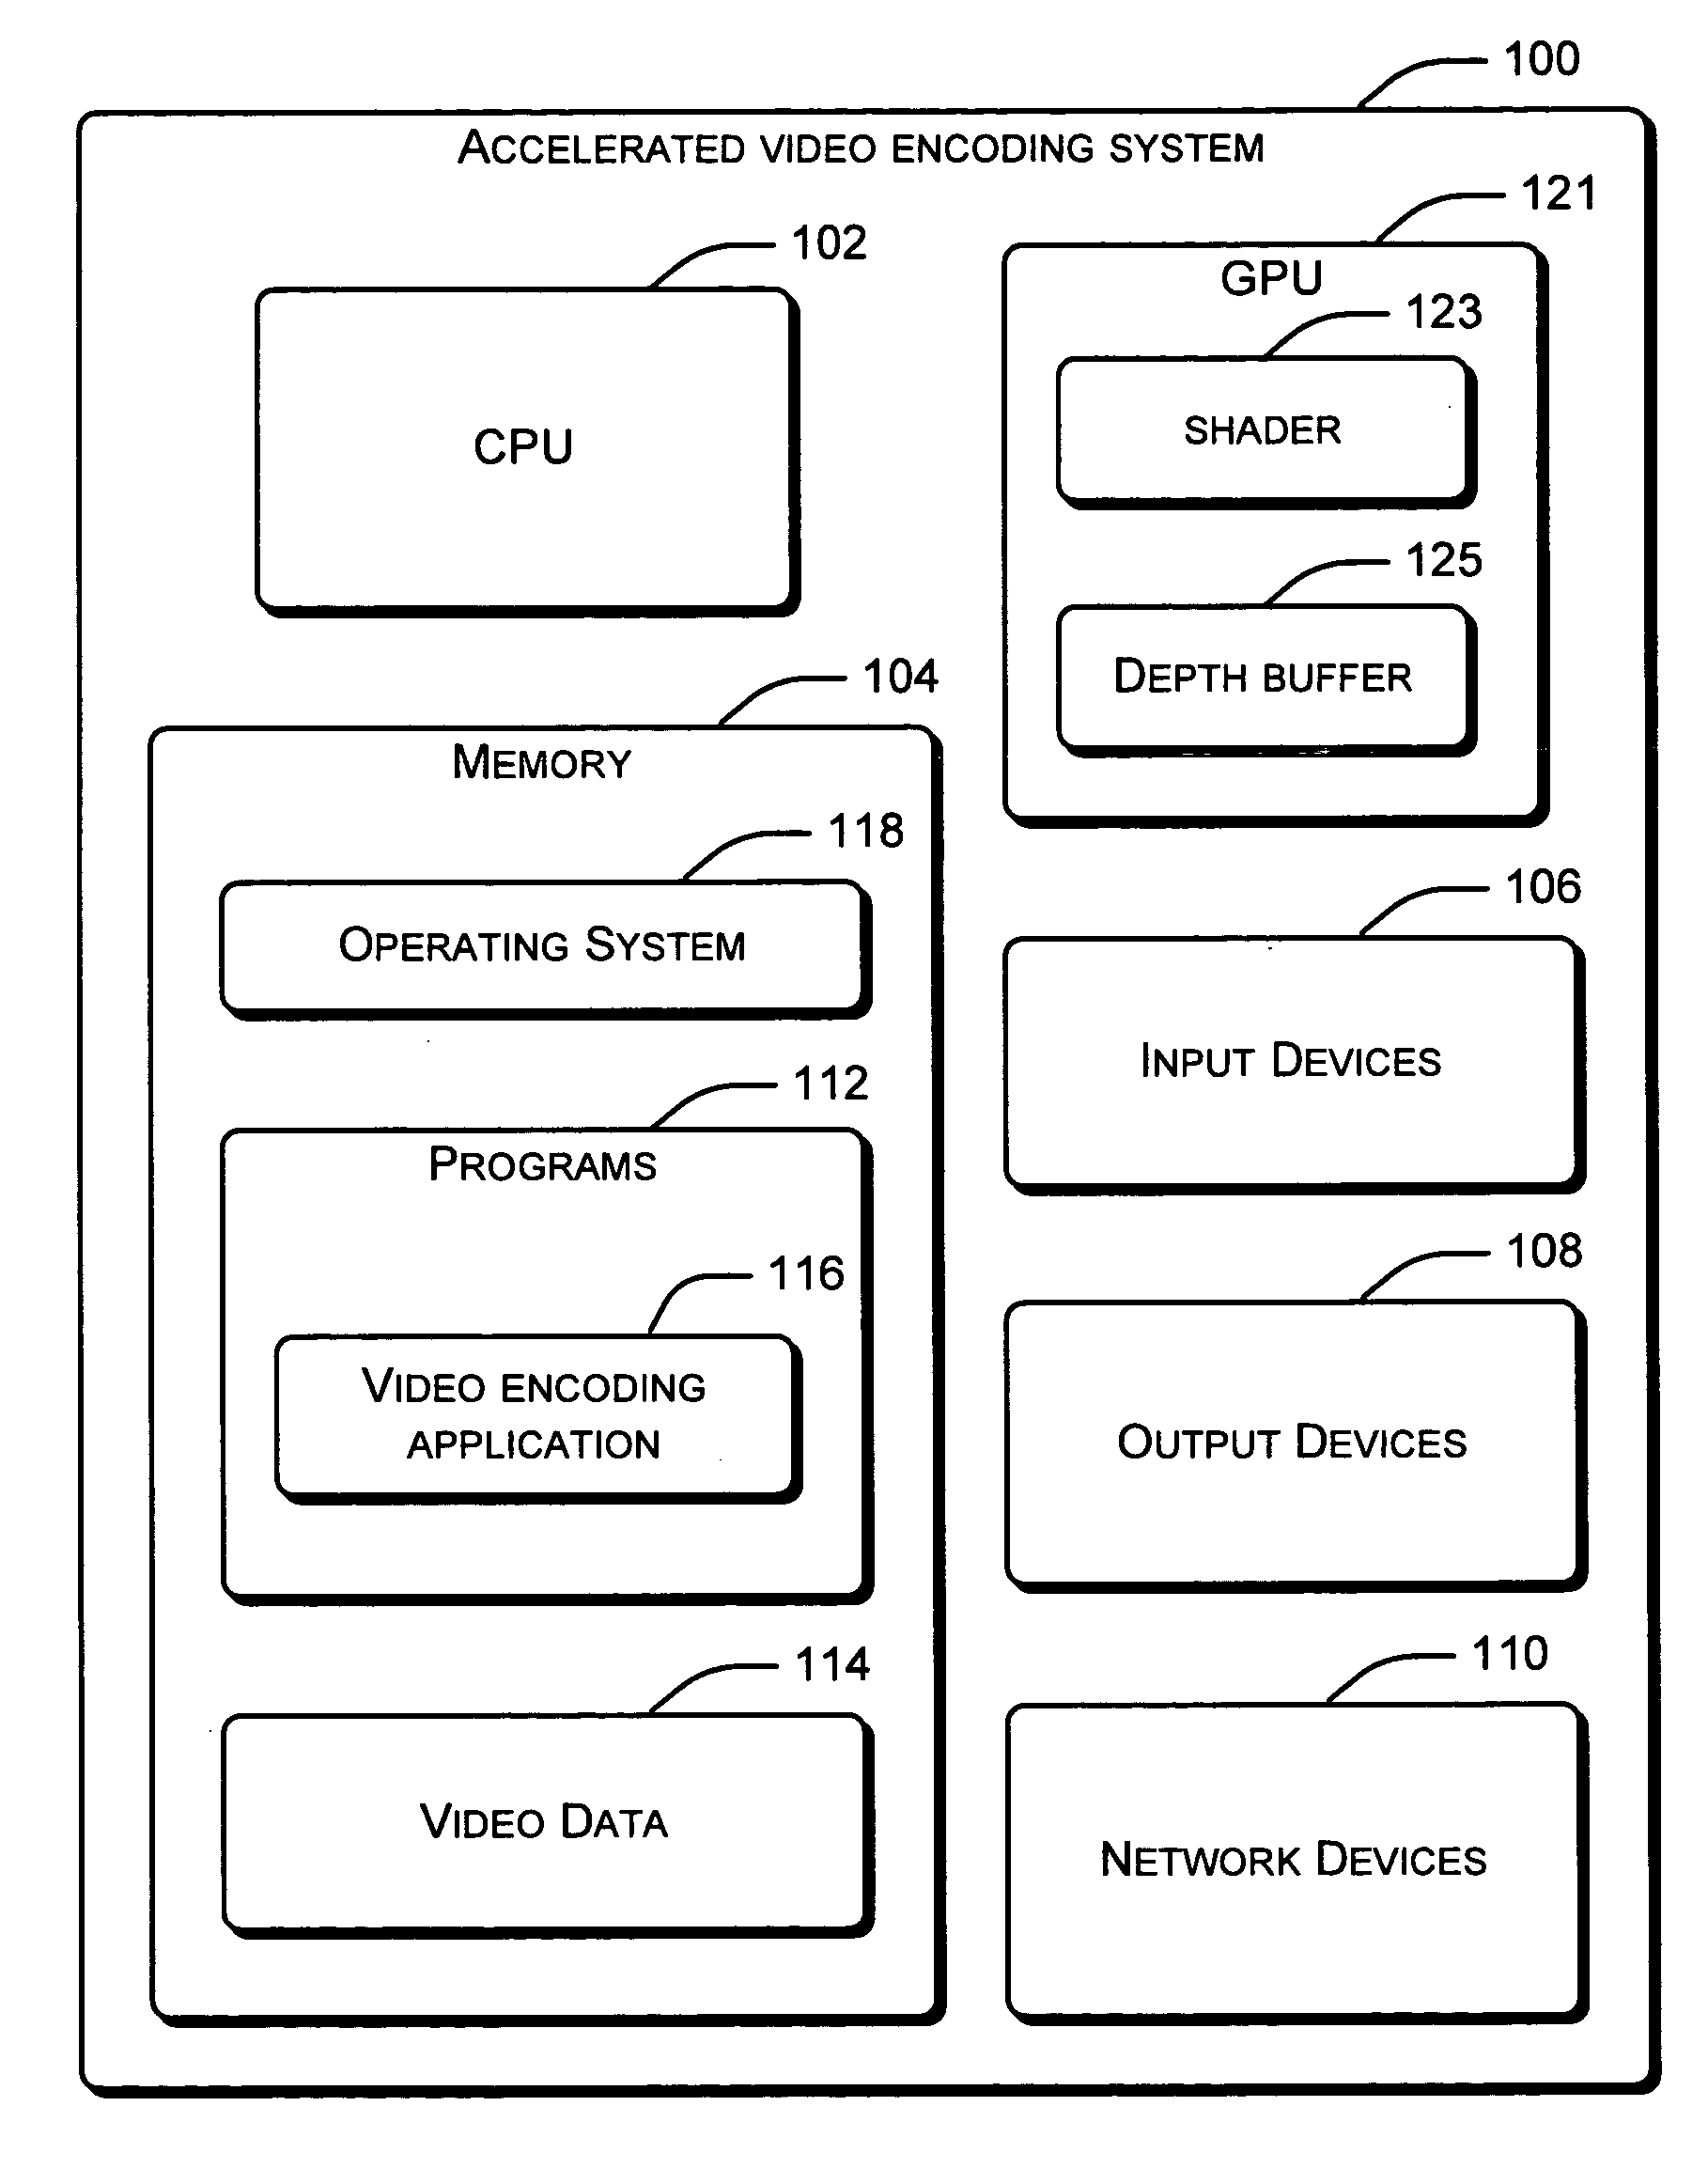 Accelerated video encoding using a graphics processing unit